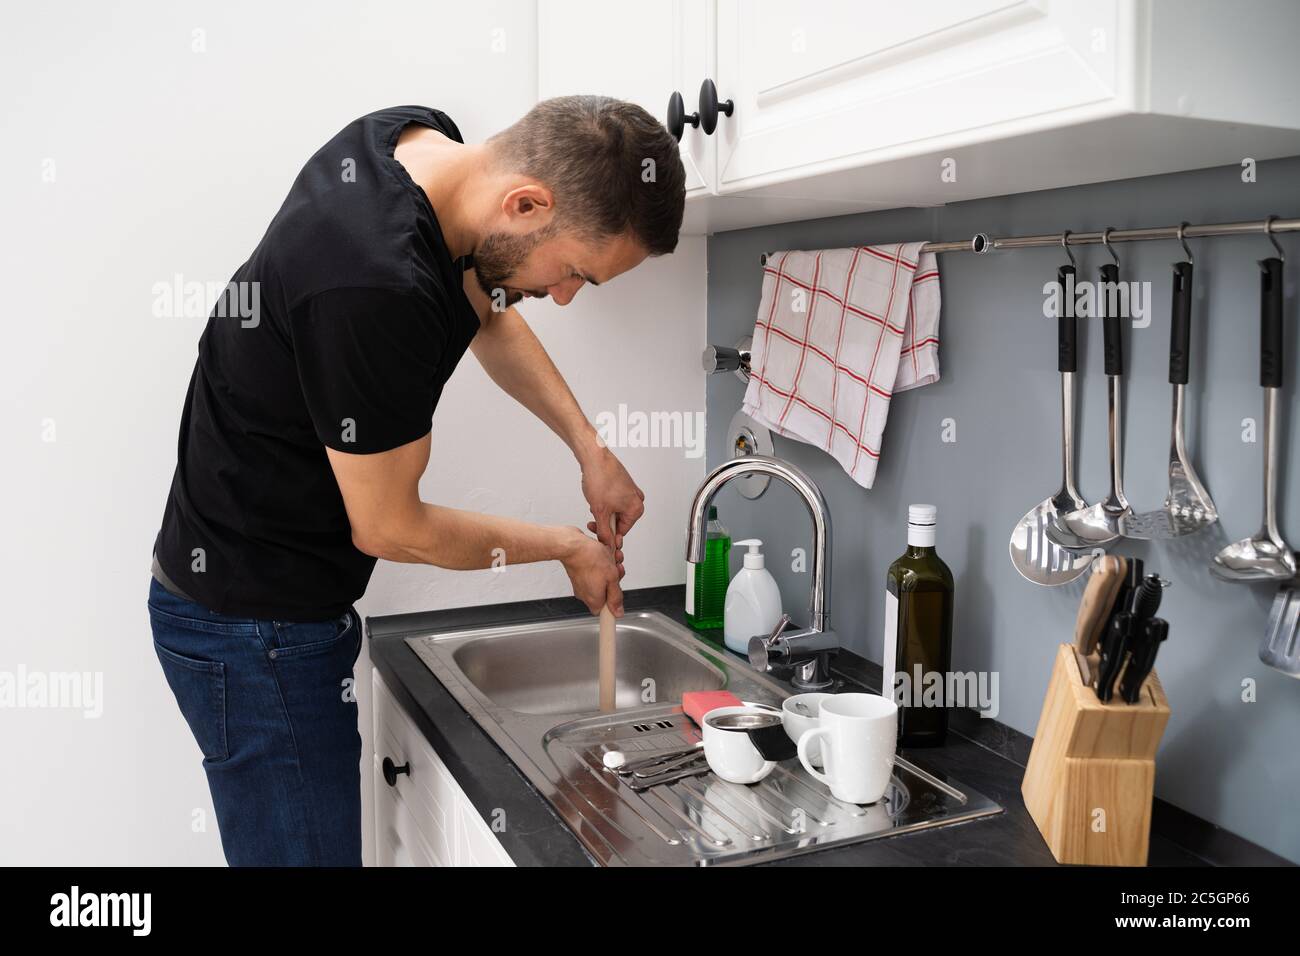 Cleaning Blocked Drain Clog In Kitchen Sink Using Plunger Stock Photo